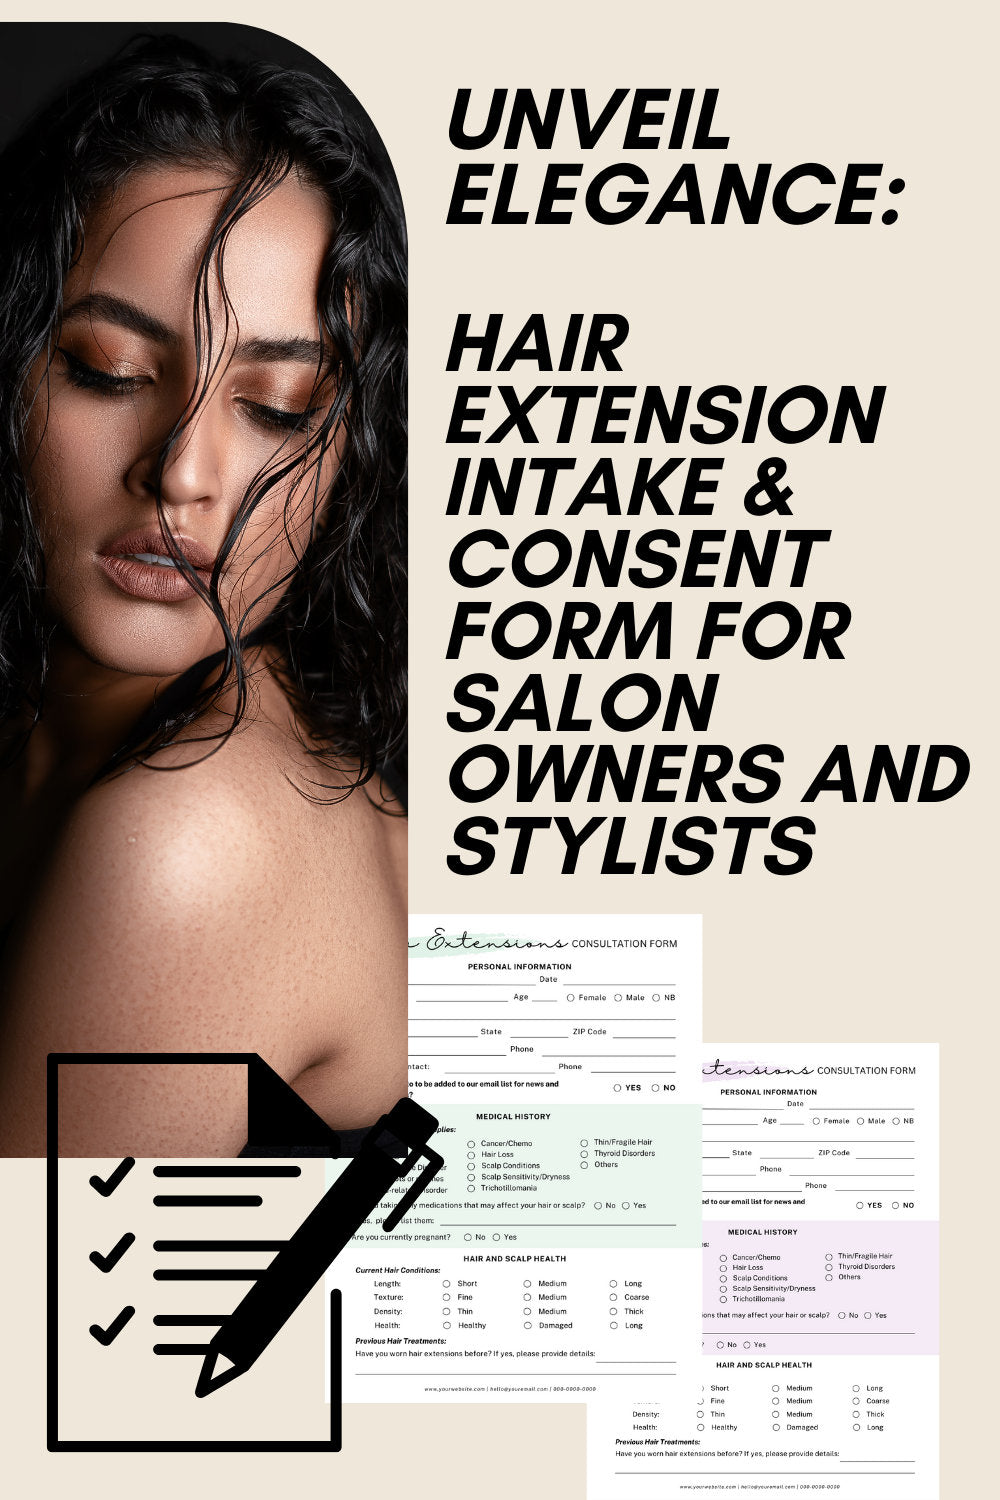 Unlock Professionalism: Hair Extension Intake & Consent Form for Salon Owners and Stylists